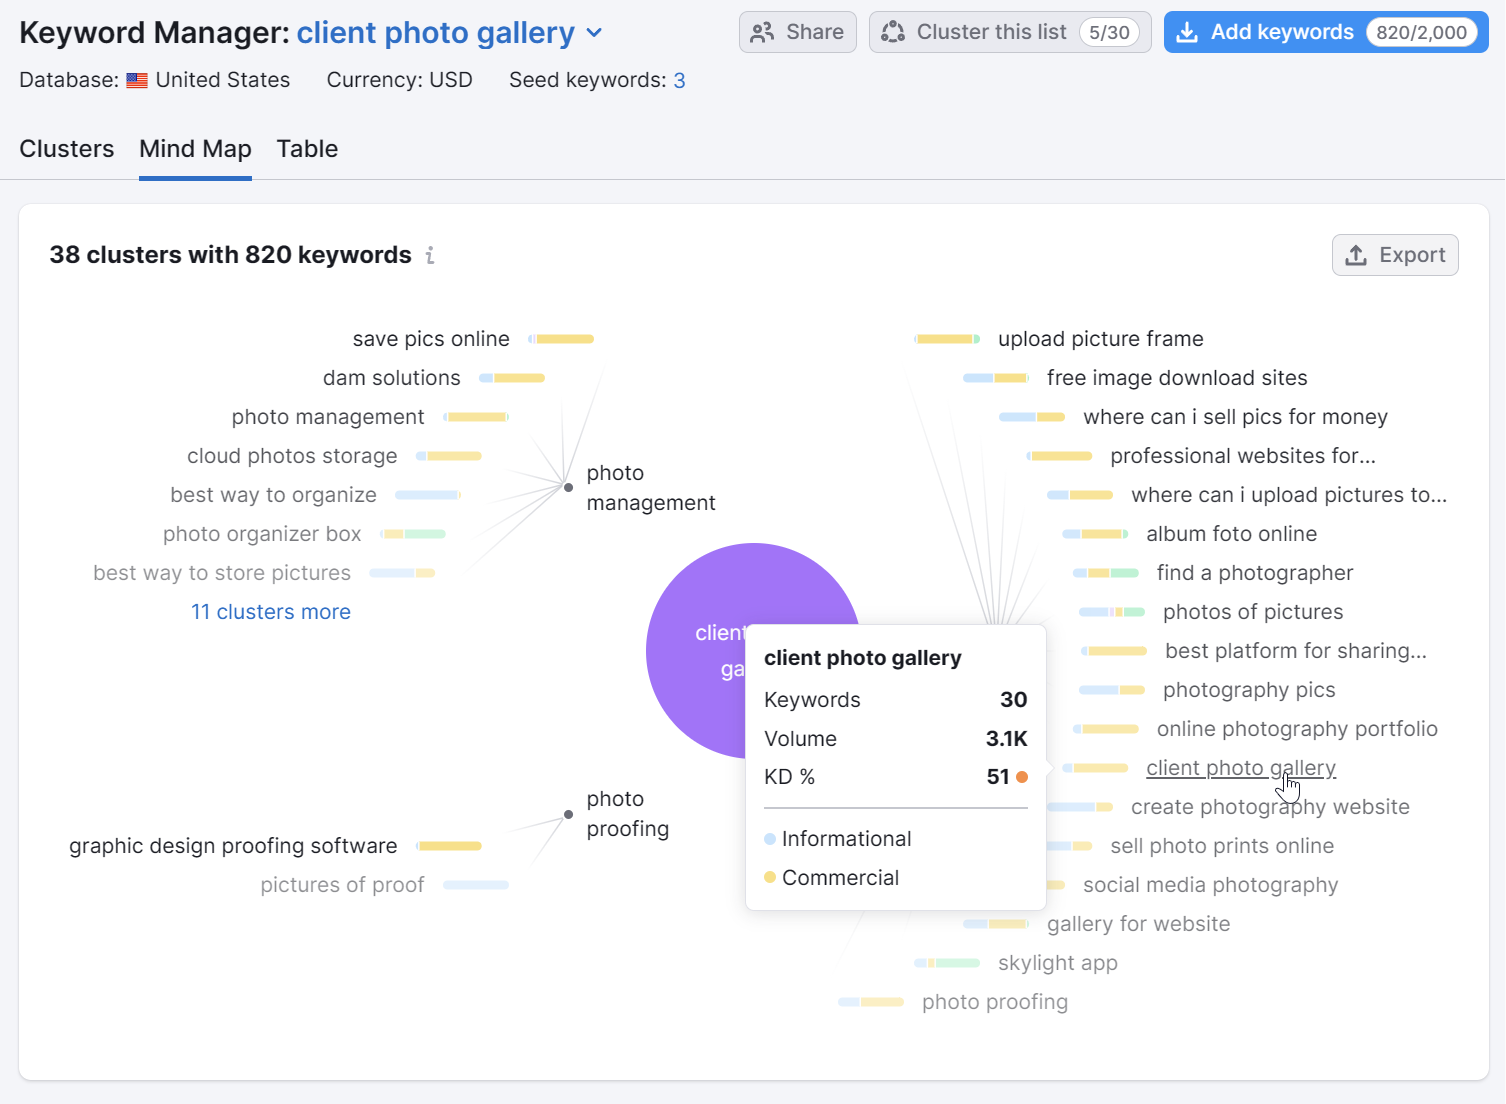 A Mind Map visualization in Semrush of 38 clusters with 820 keywords all related to the term "client photo gallery".